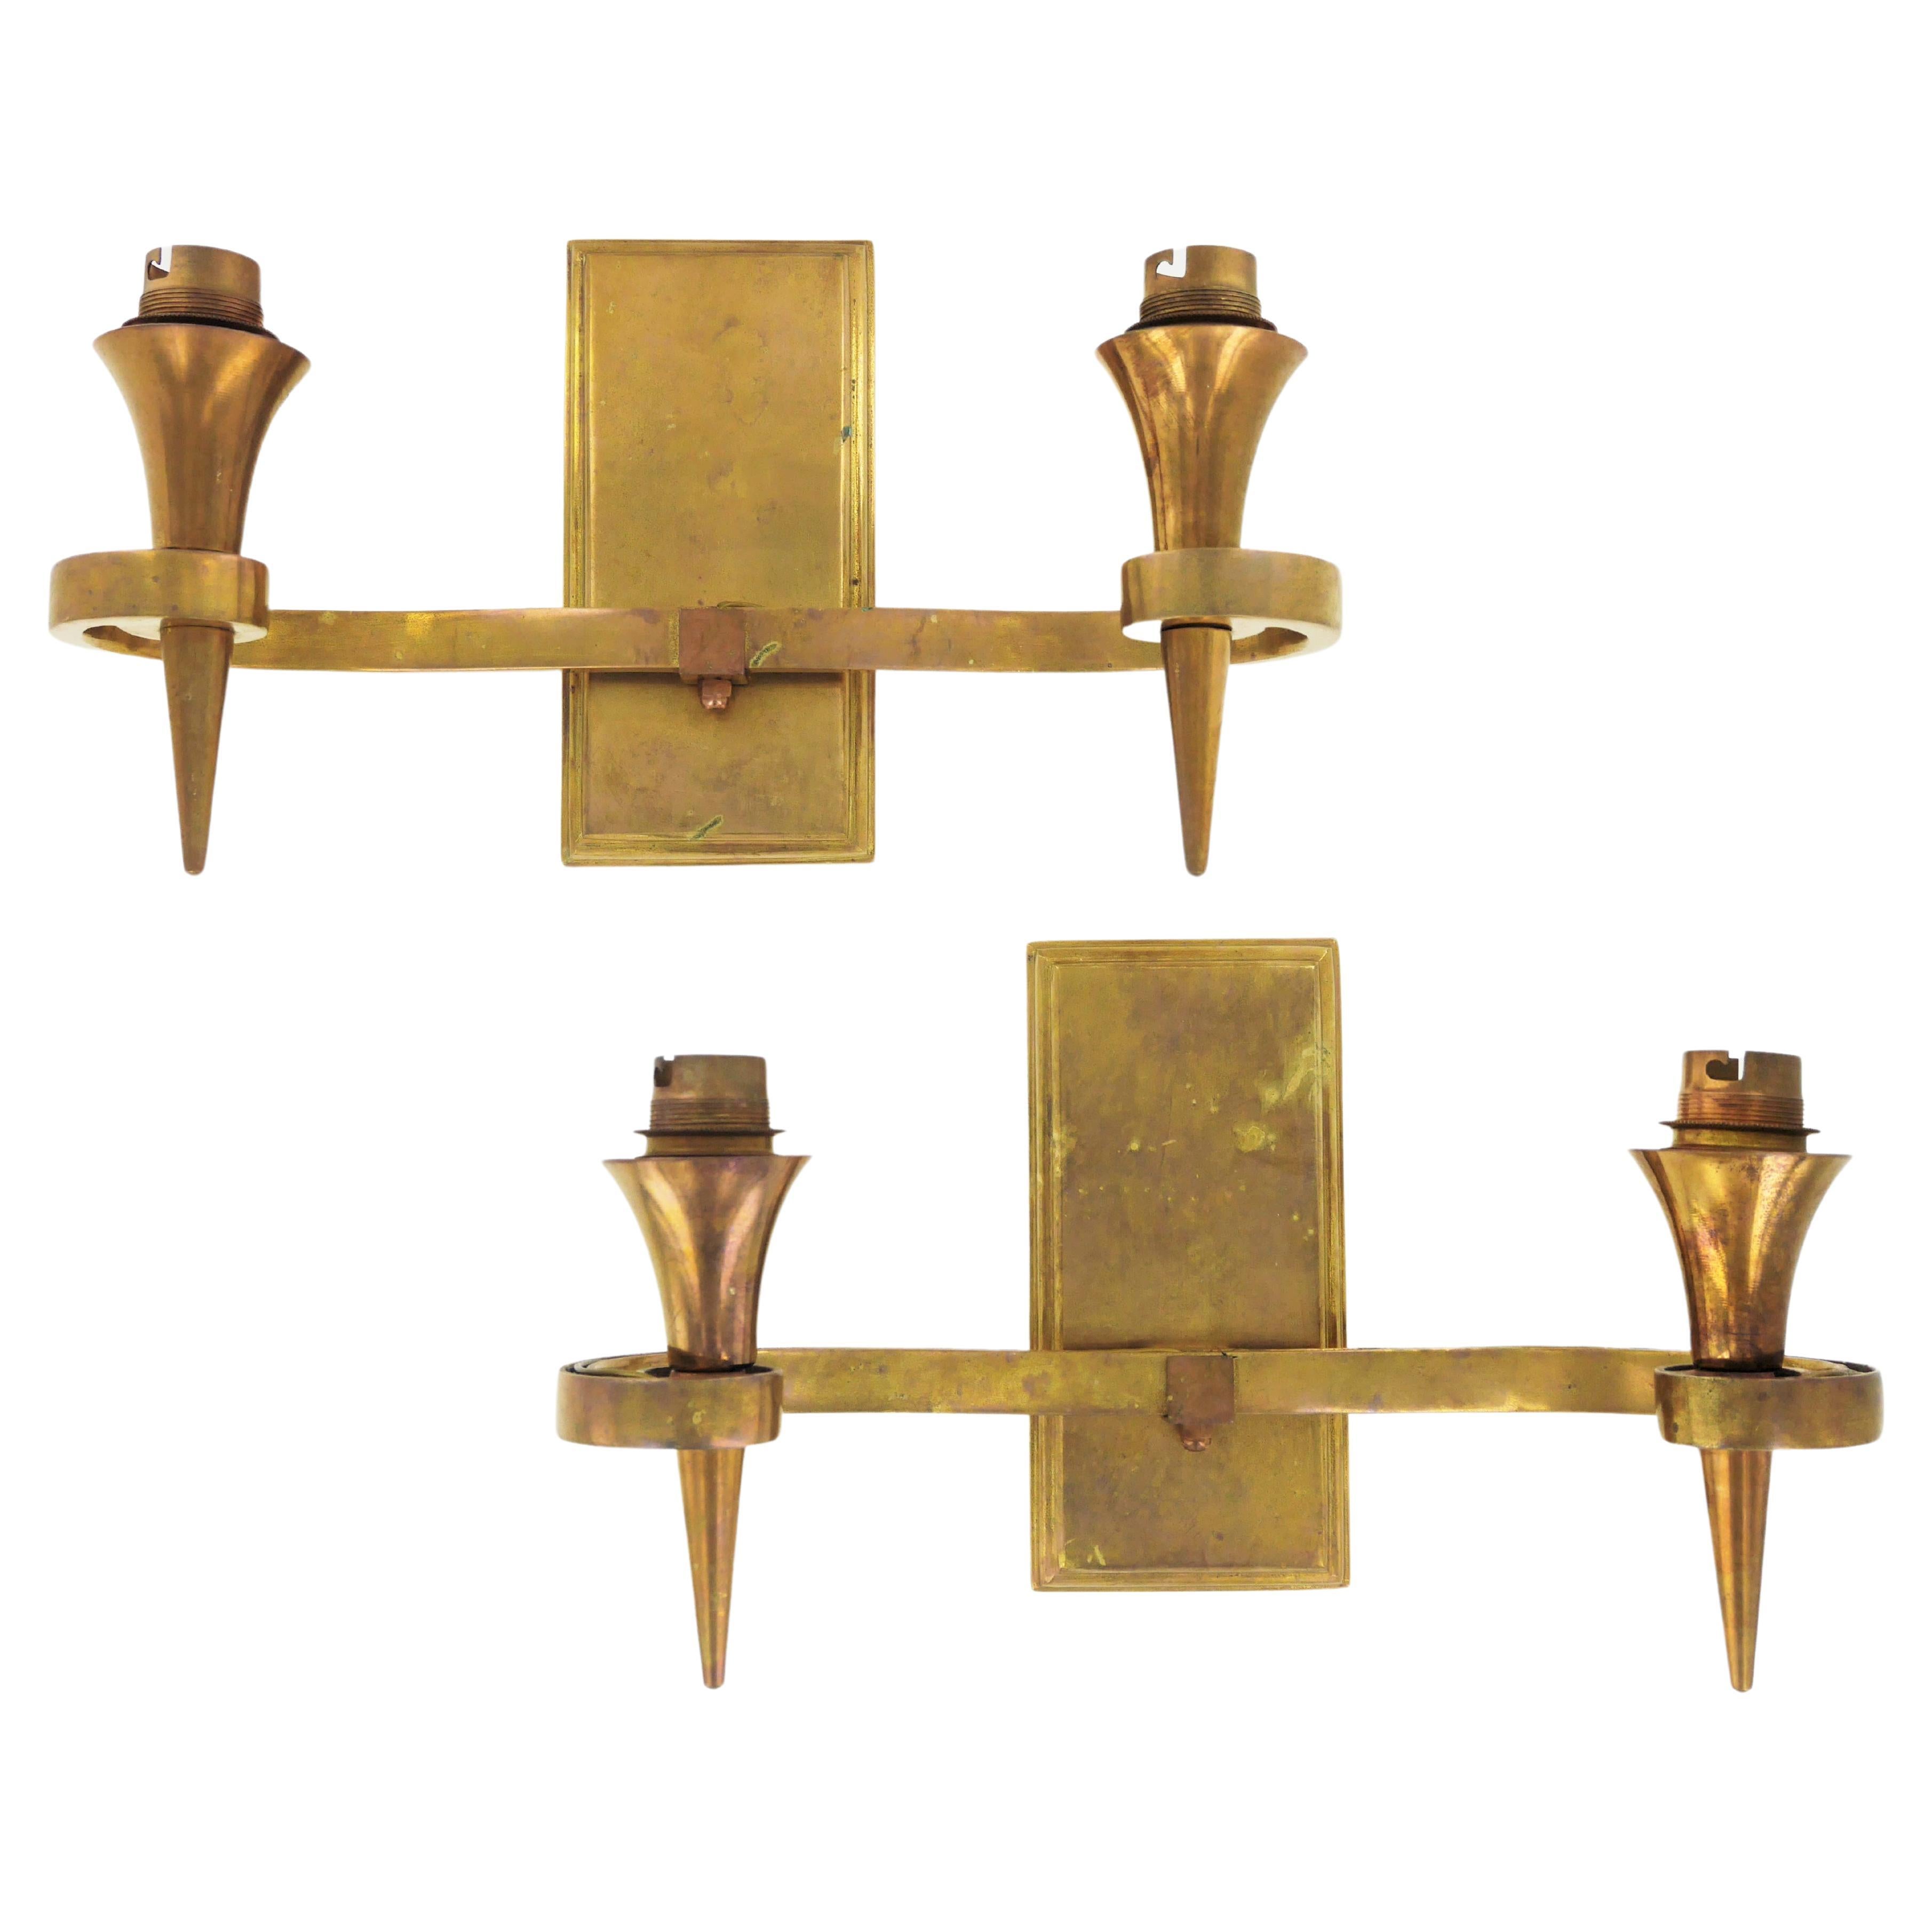 Pair of Art Deco Wall Sconces